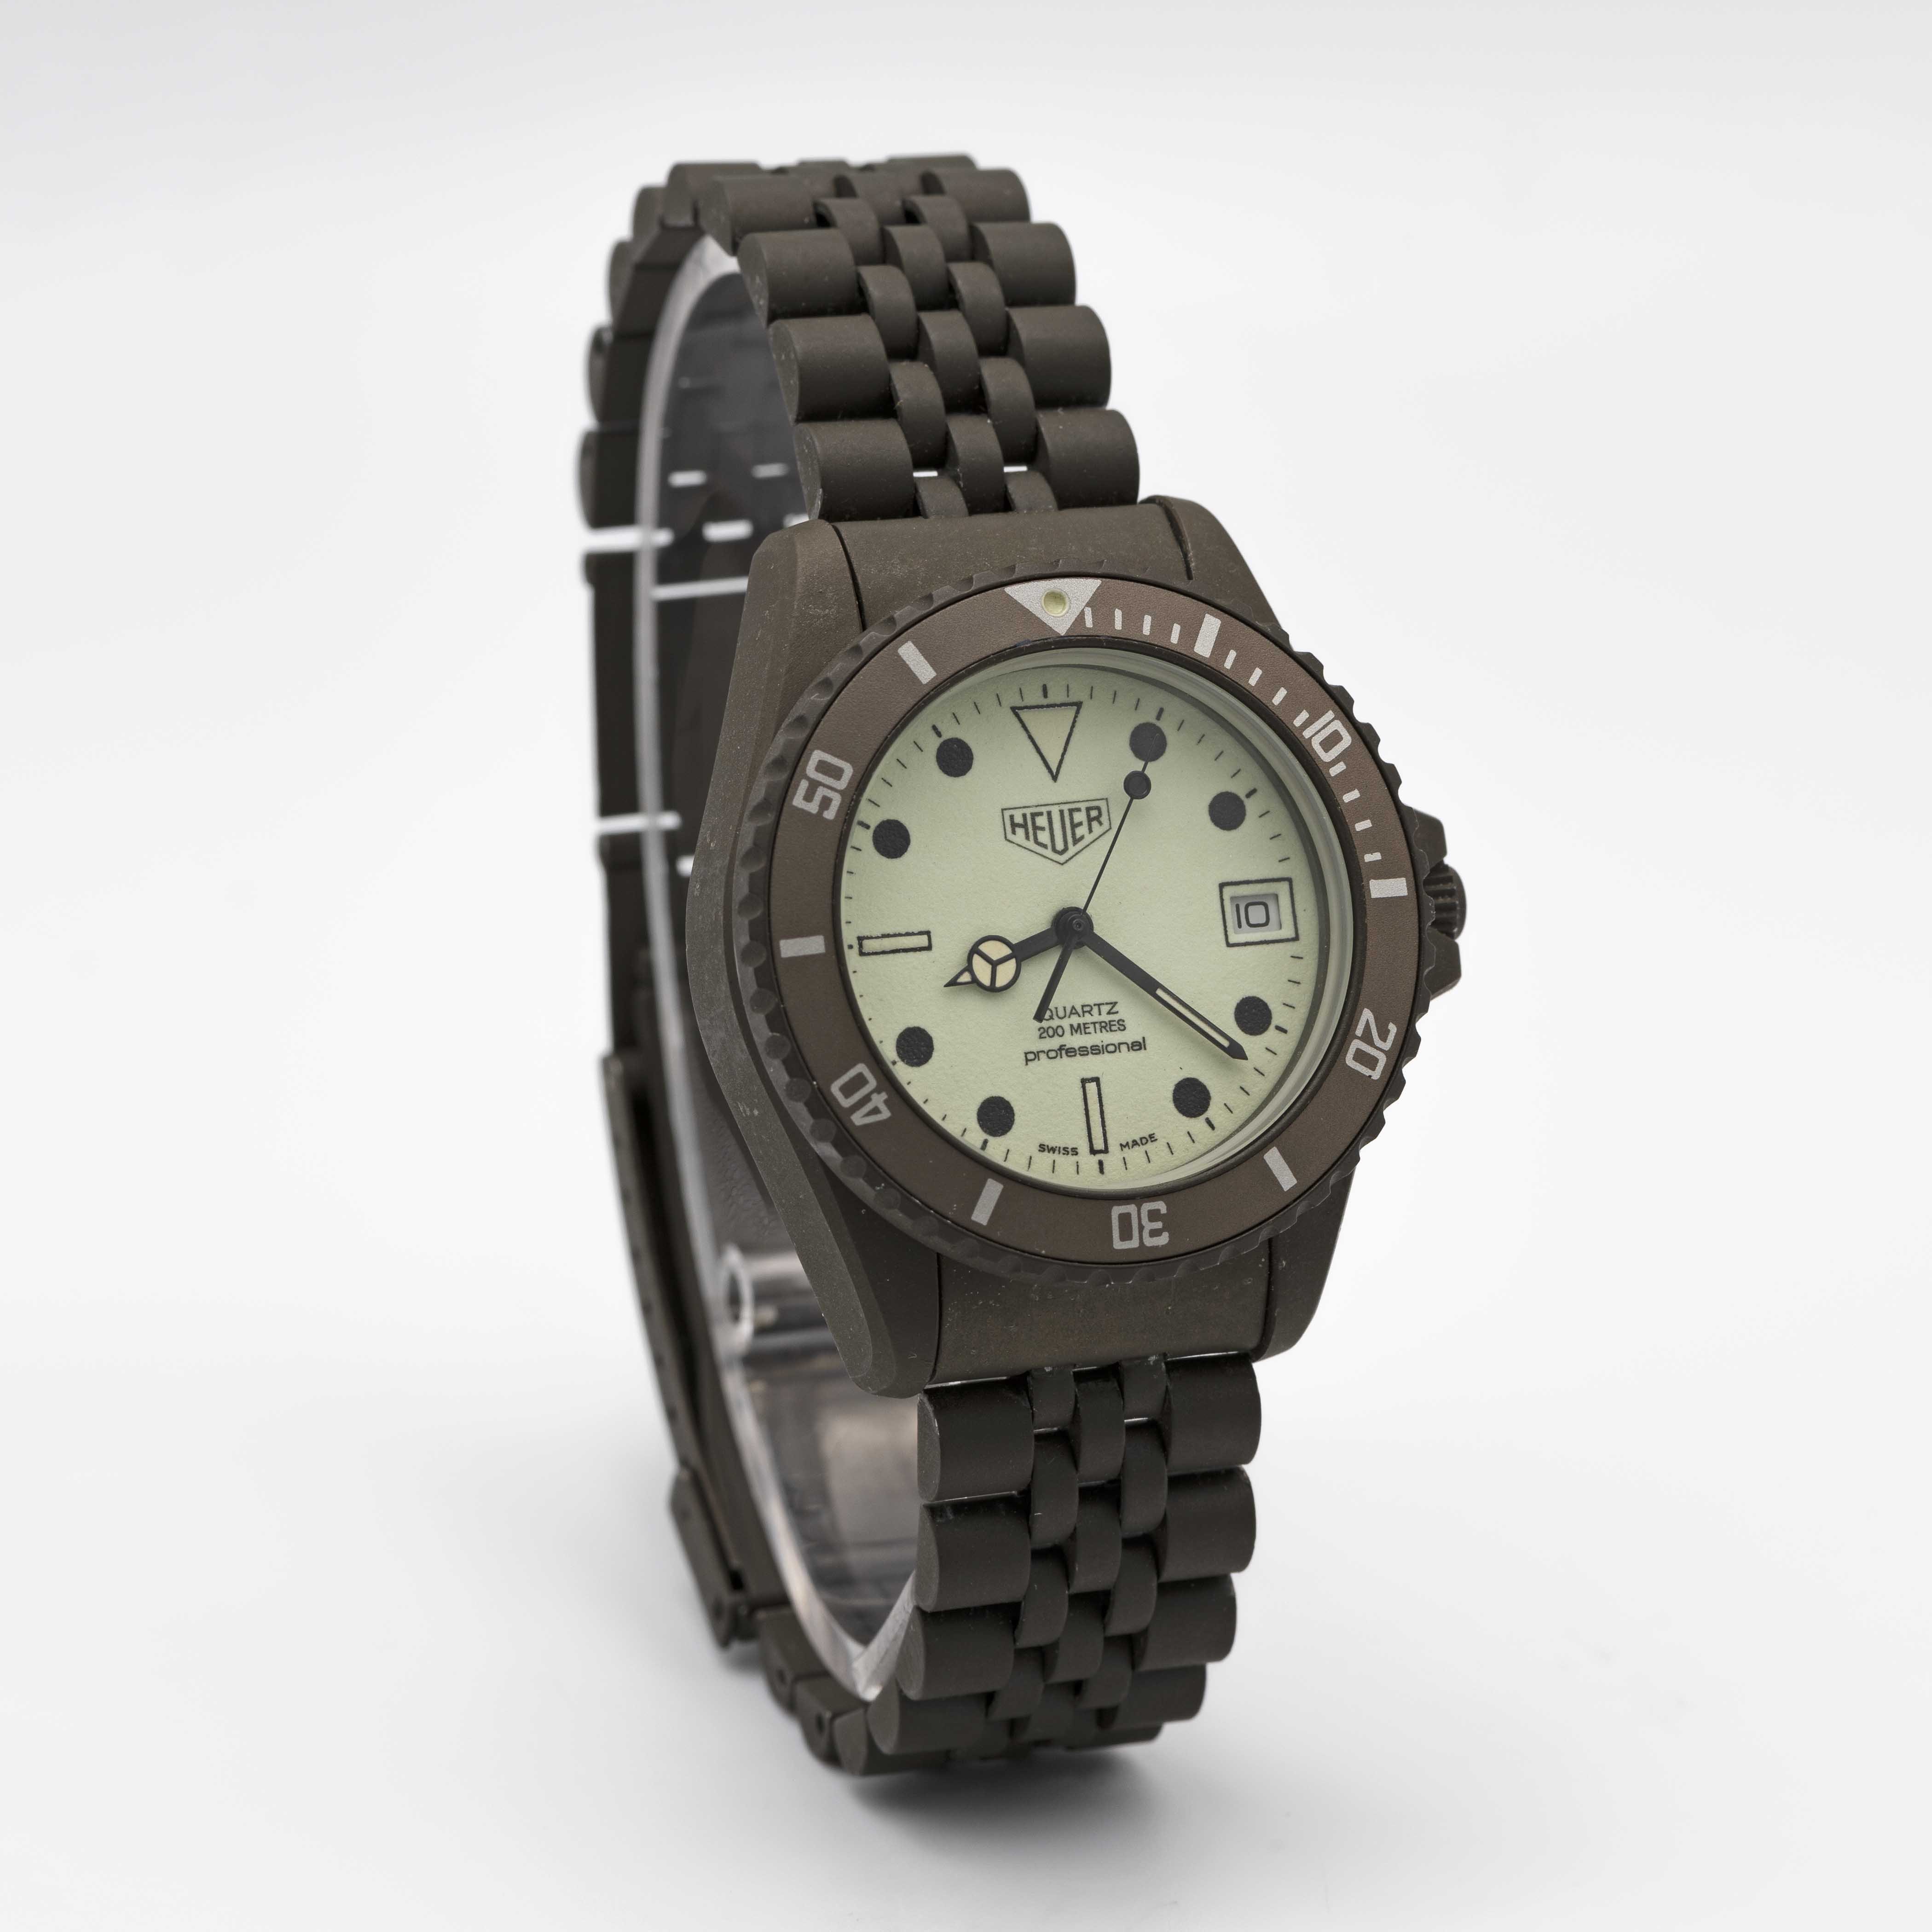 A RARE GENTLEMAN'S OLIVE GREEN PVD COATED HEUER PROFESSIONEL 200 METRES NIGHT DIVER "MILITARY" - Image 4 of 9